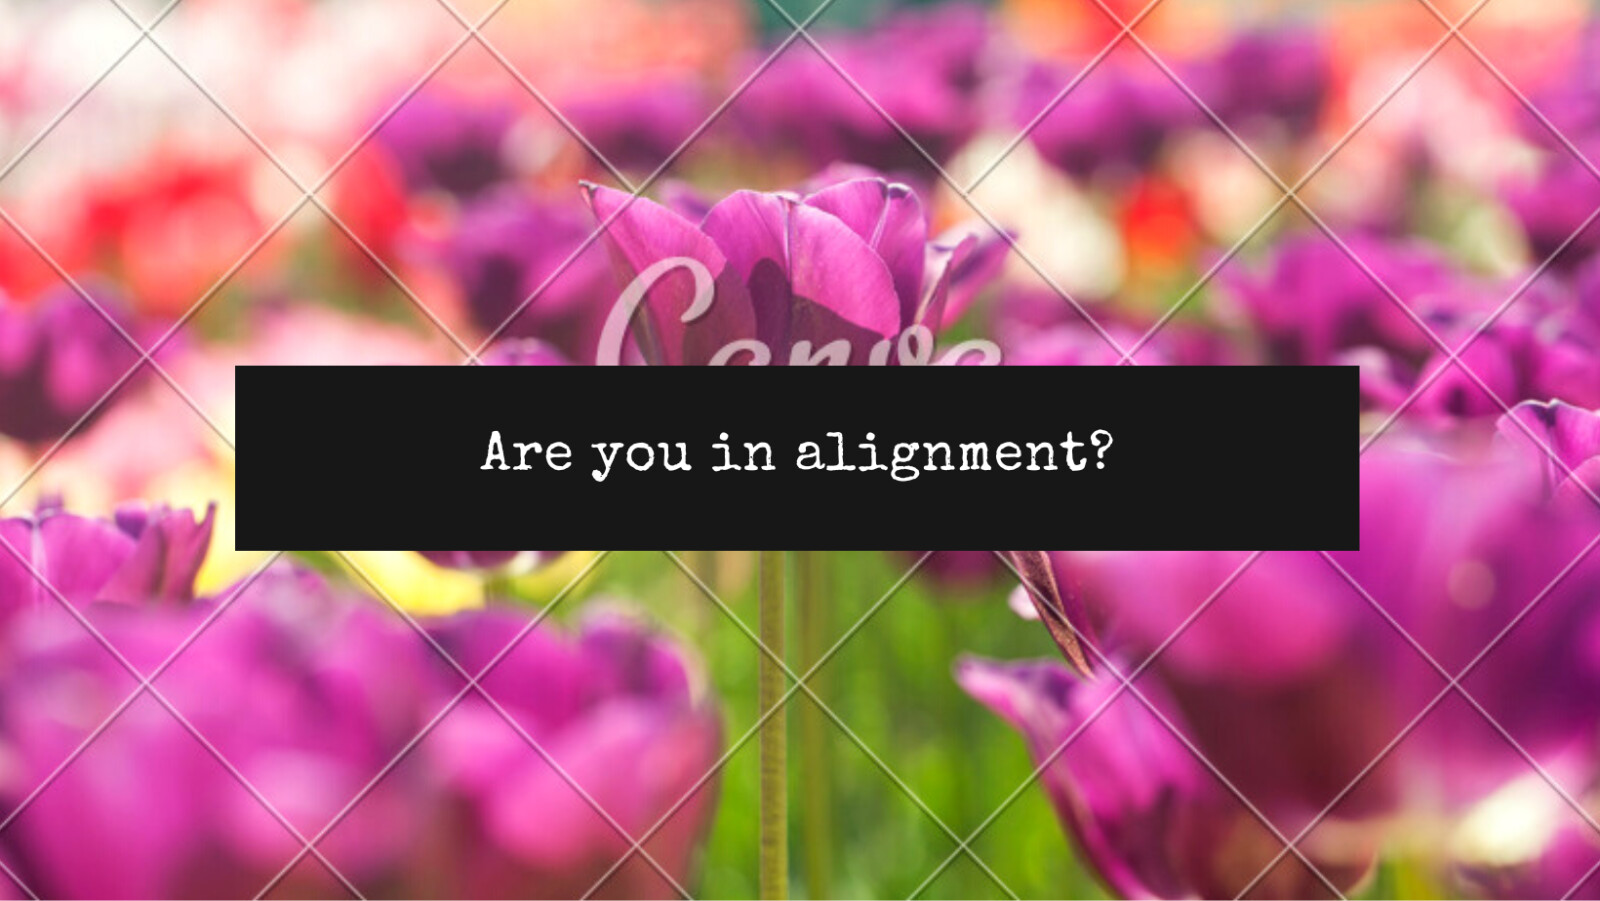 Are you in alignment?